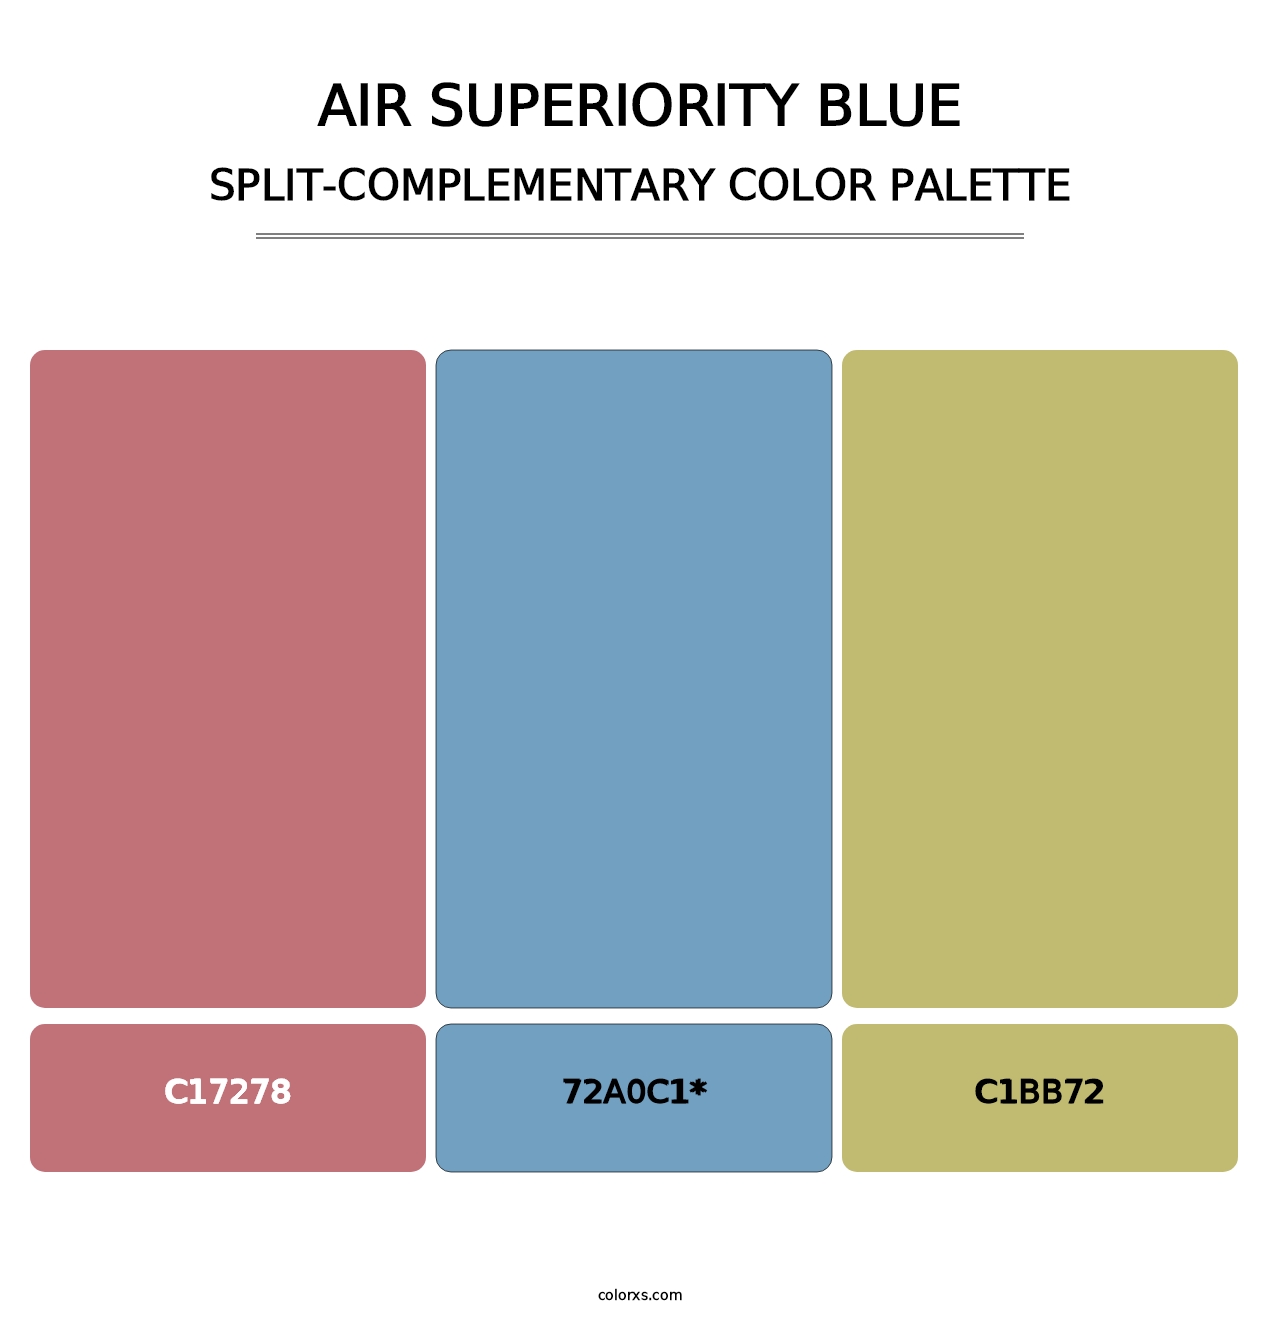 Air Superiority Blue - Split-Complementary Color Palette